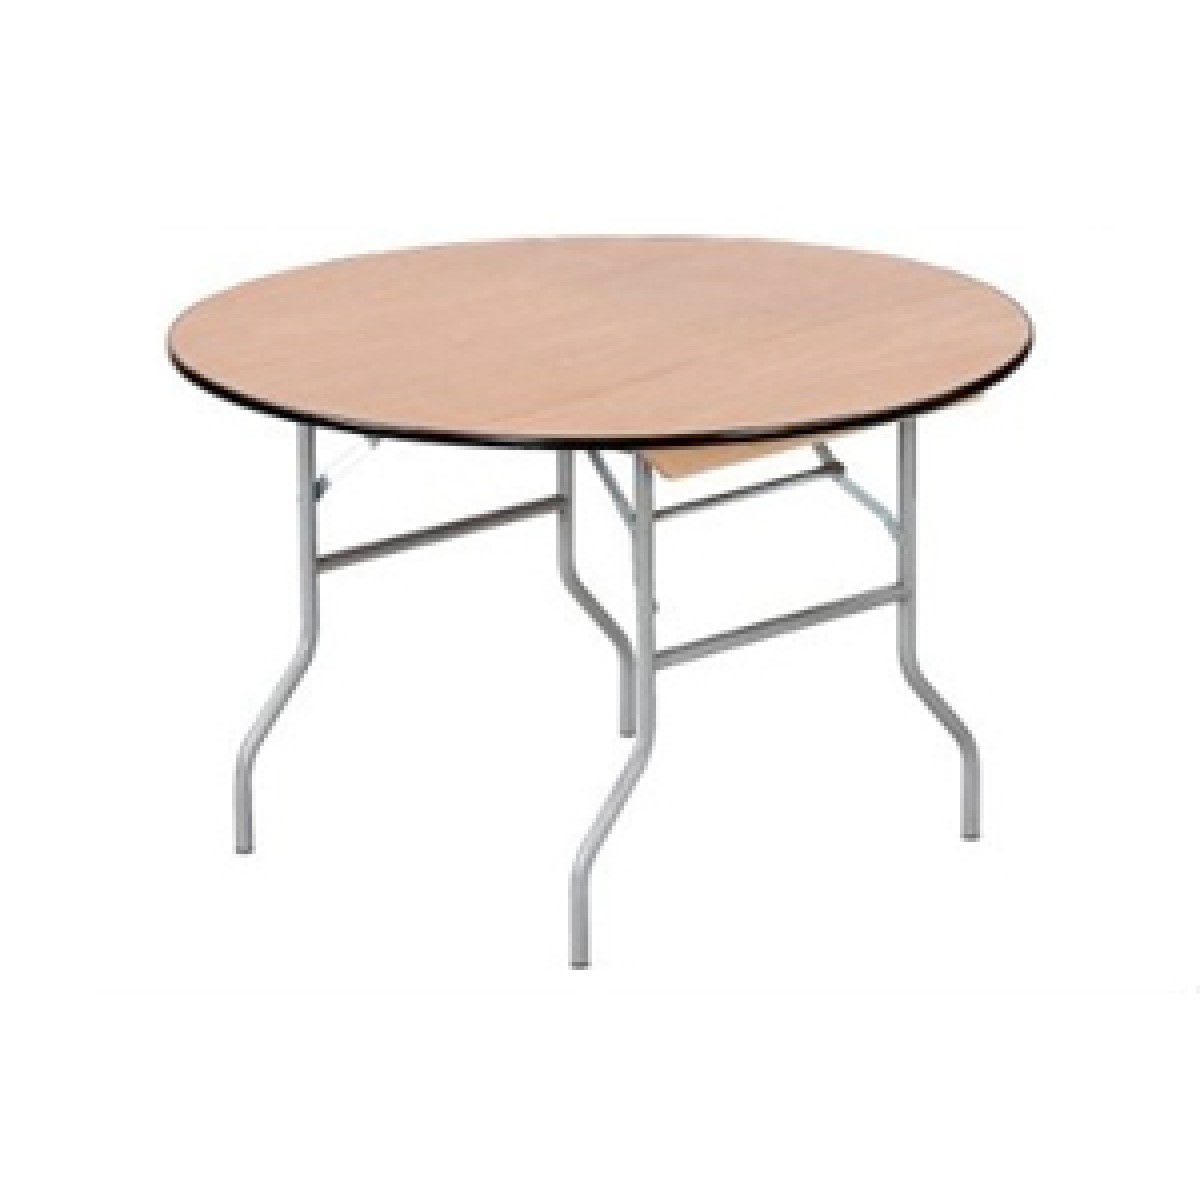 48_round_wood_table_6